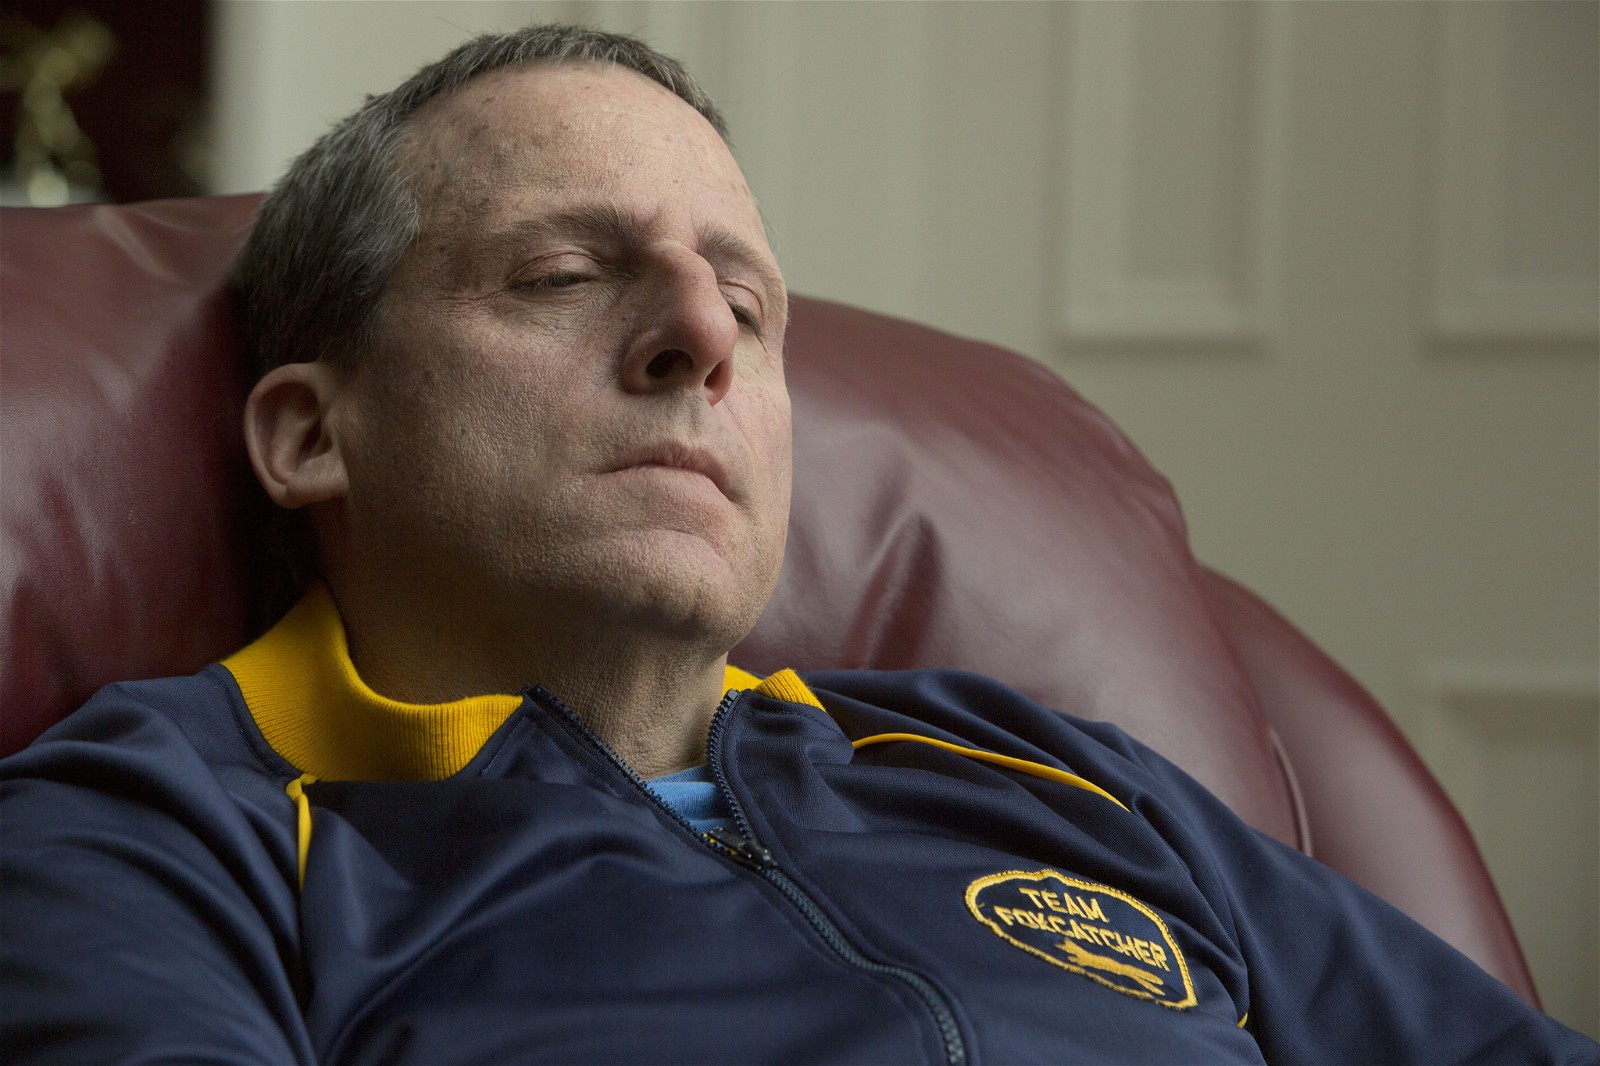 Steve Carell in Foxcatcher (2014).